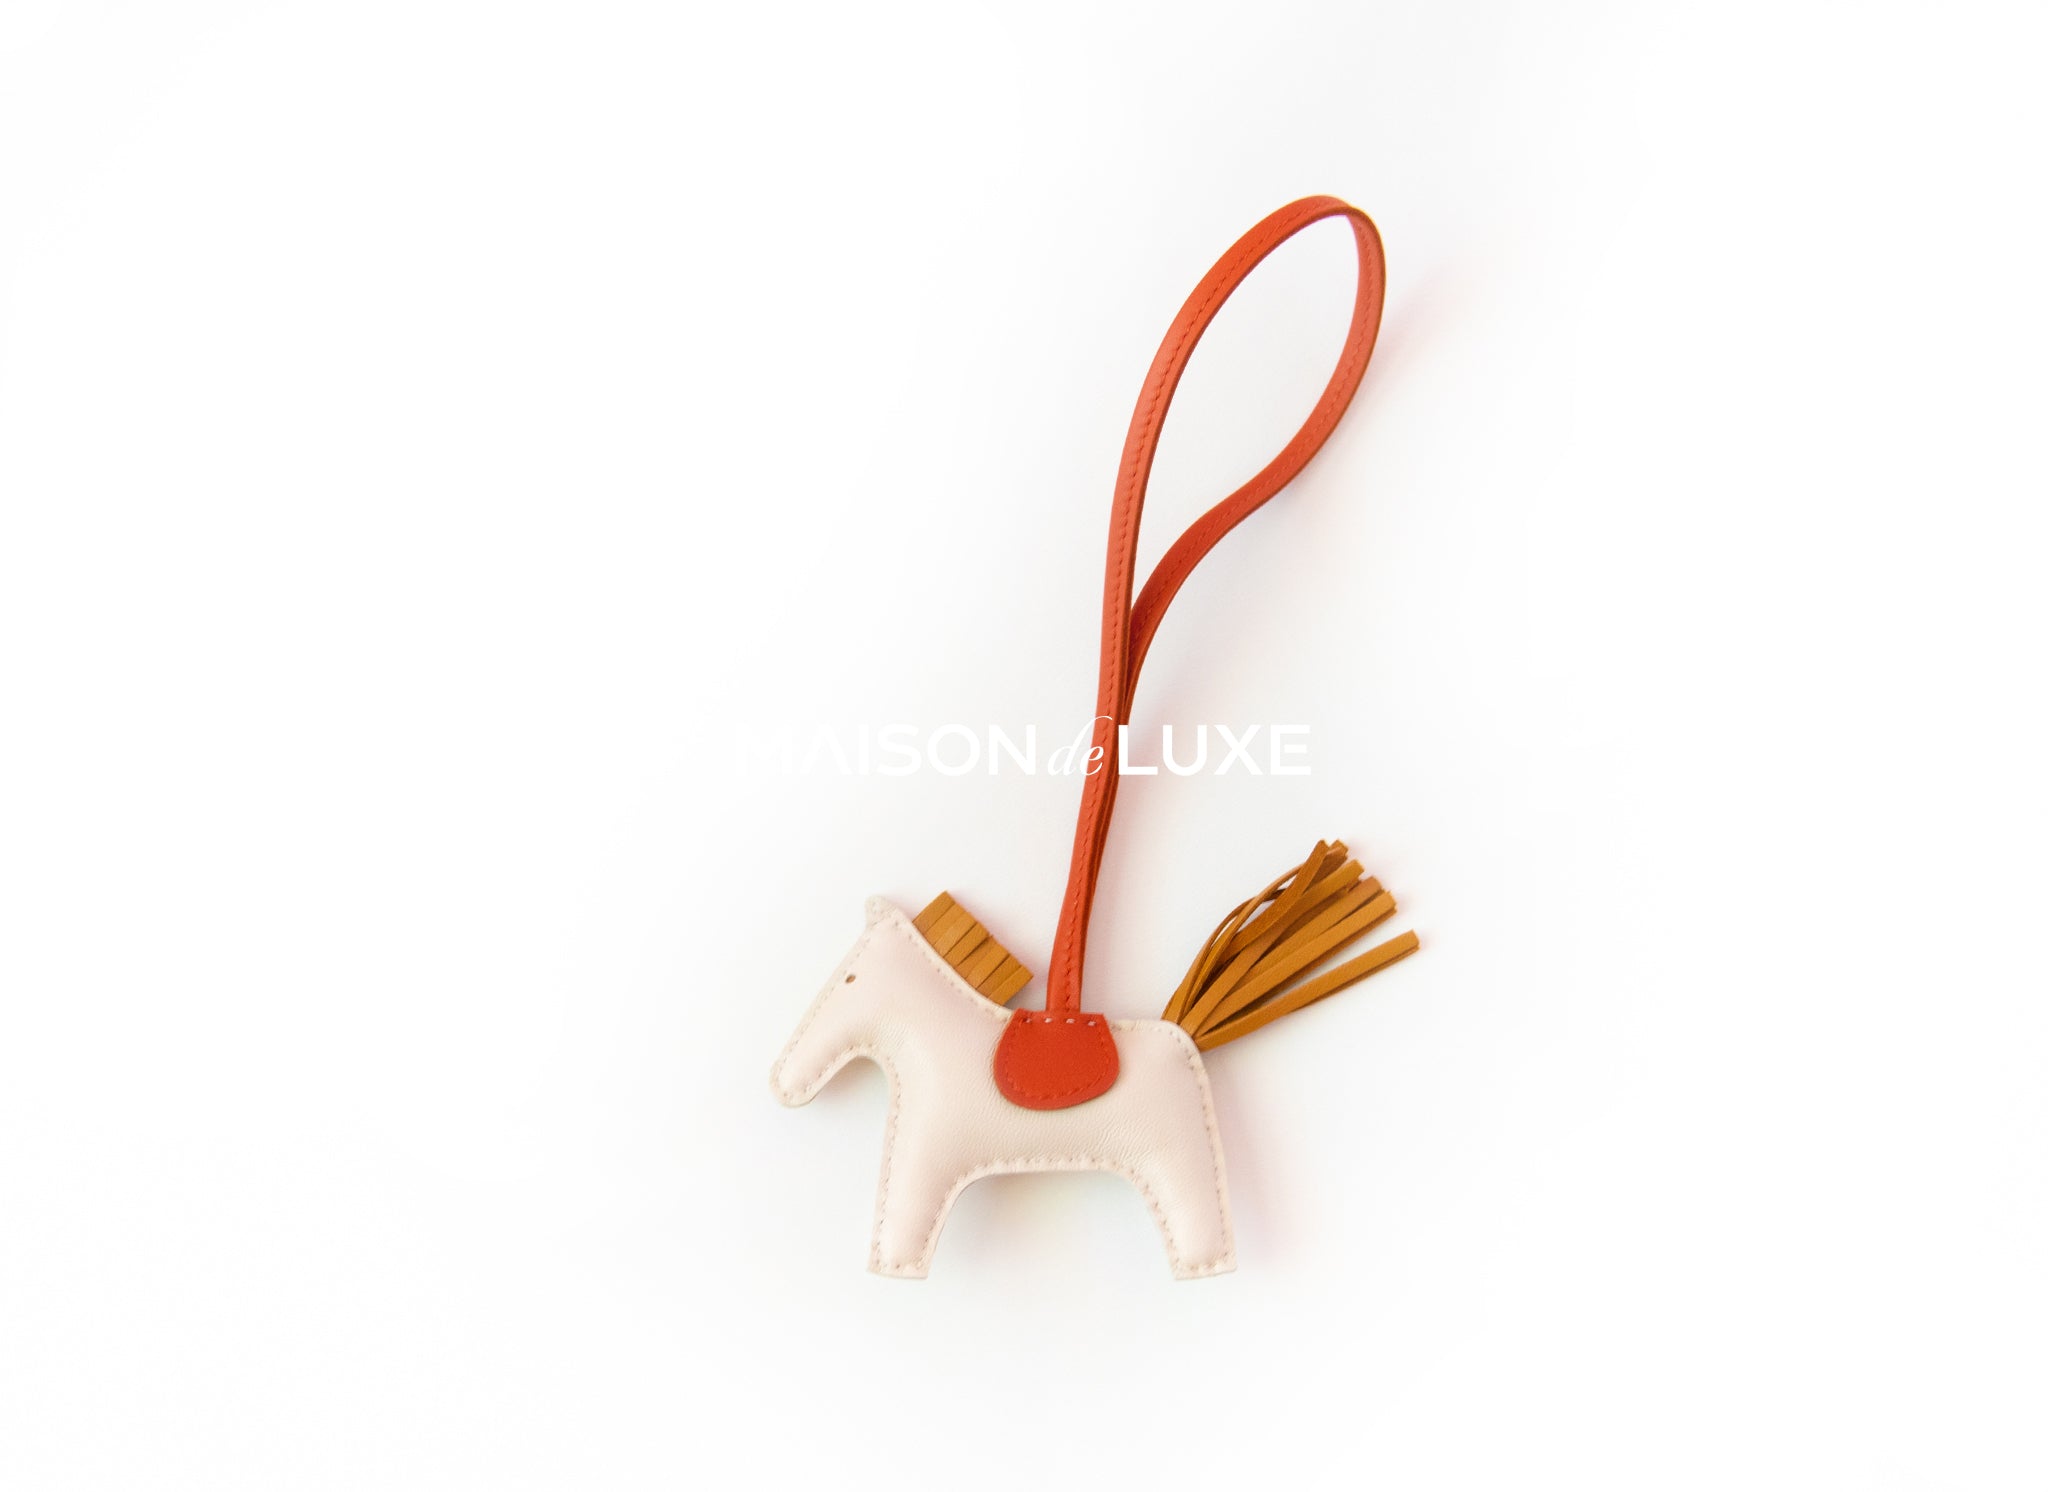 Luxe Leather Horse Charm